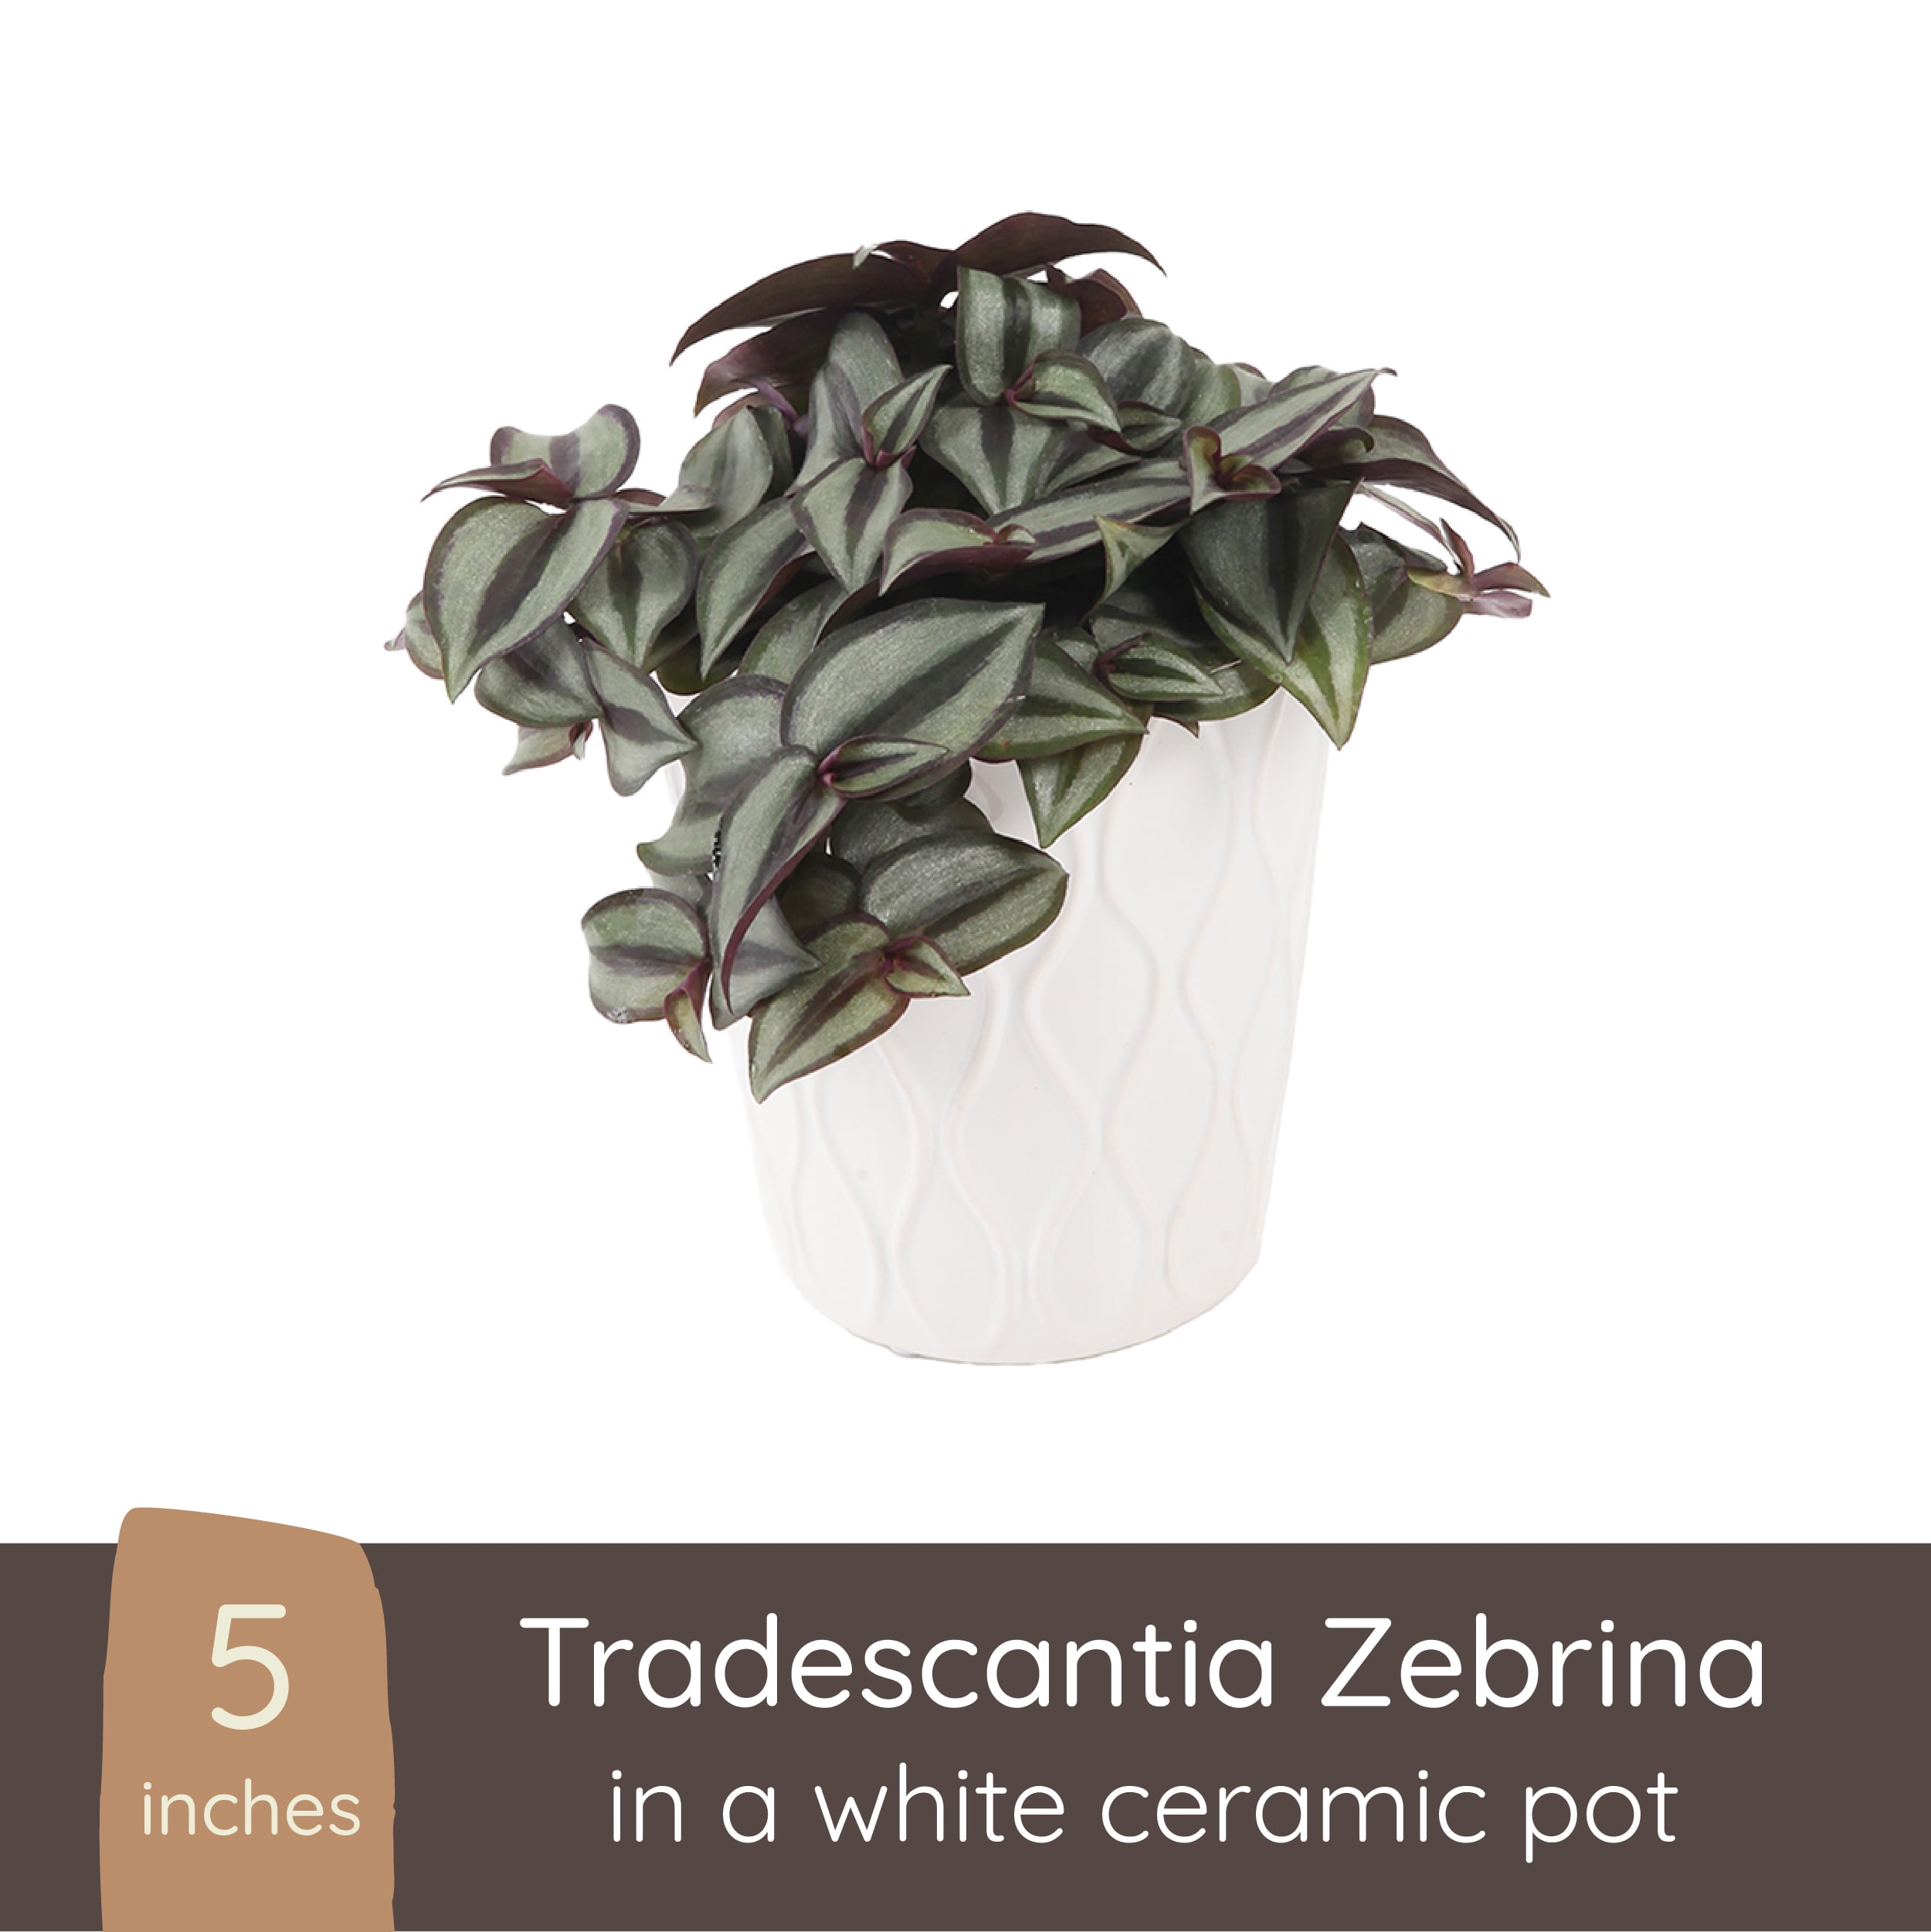 Rooted Plant Tradescantia Zebrina House Plant 2-3 Day Wandering Jew Live Plant 